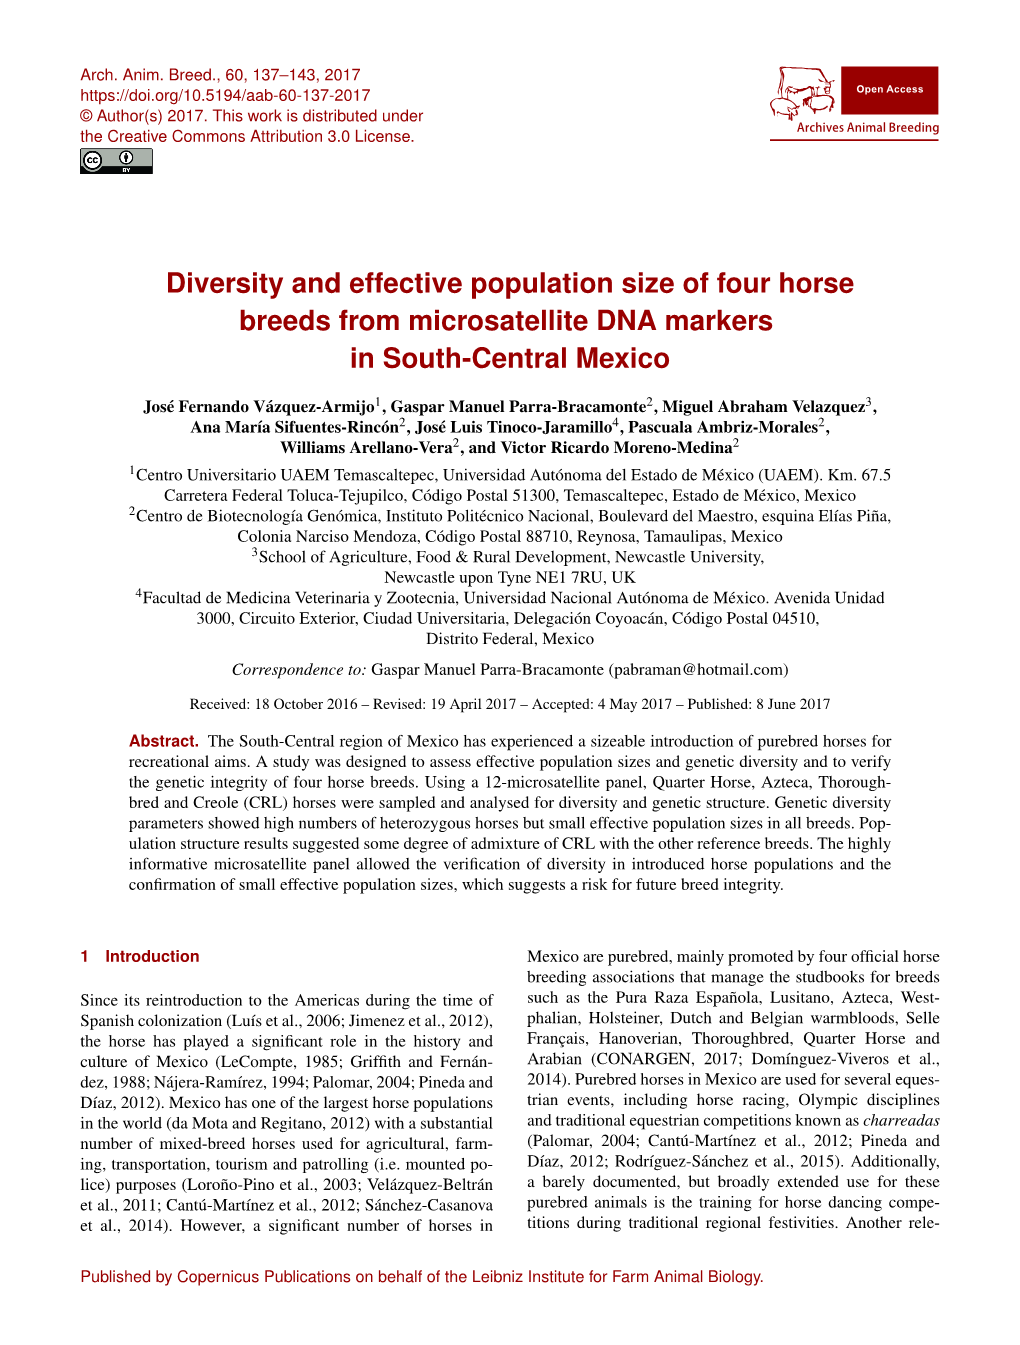 Diversity and Effective Population Size of Four Horse Breeds from Microsatellite DNA Markers in South-Central Mexico